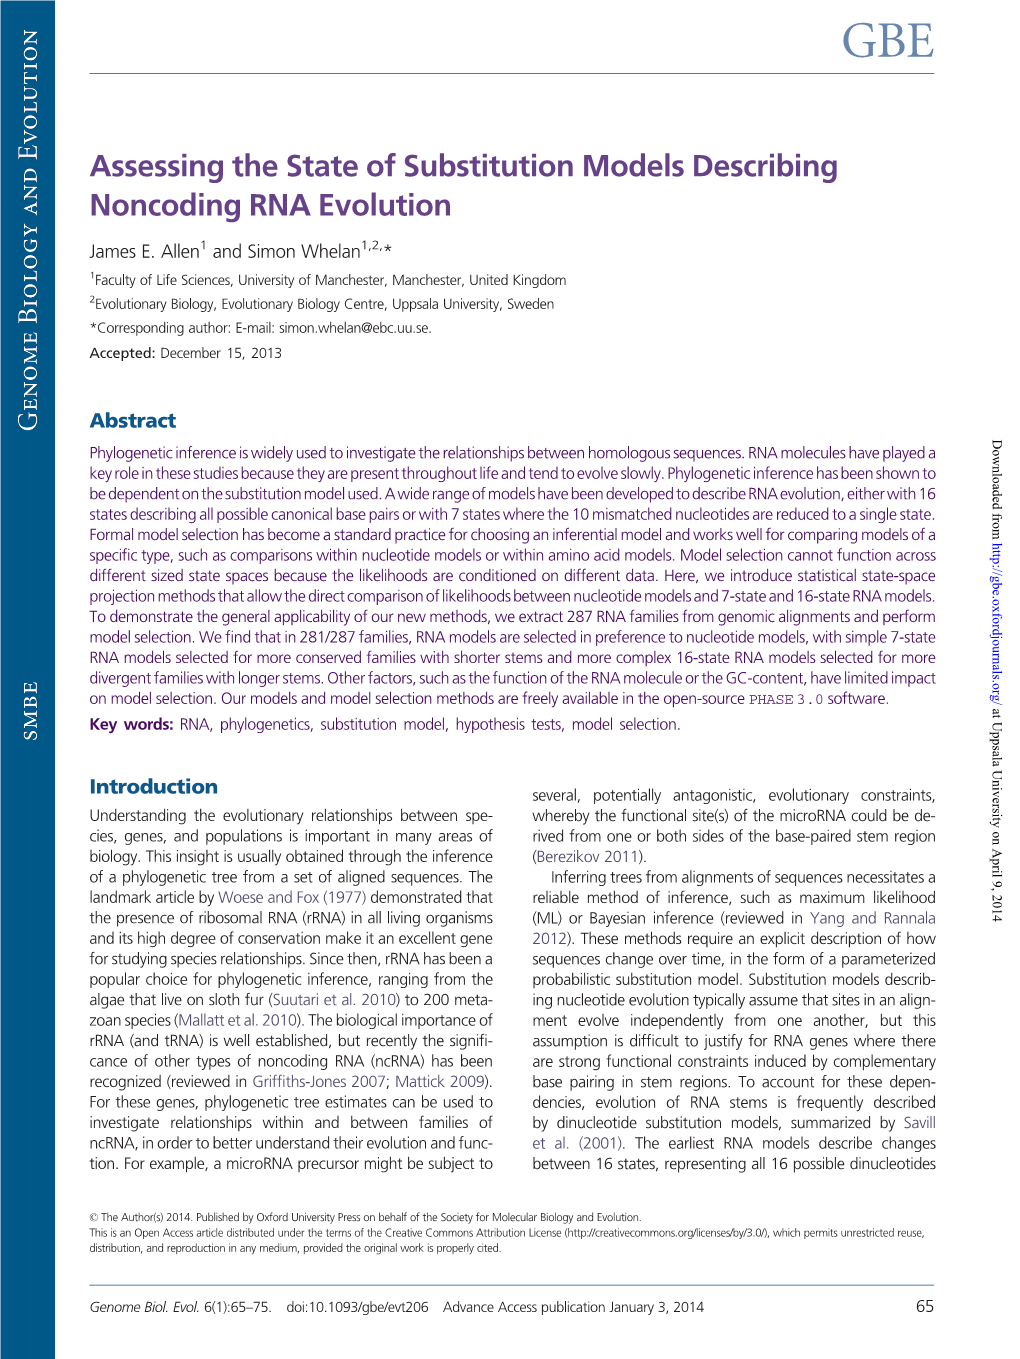 Assessing the State of Substitution Models Describing Noncoding RNA Evolution